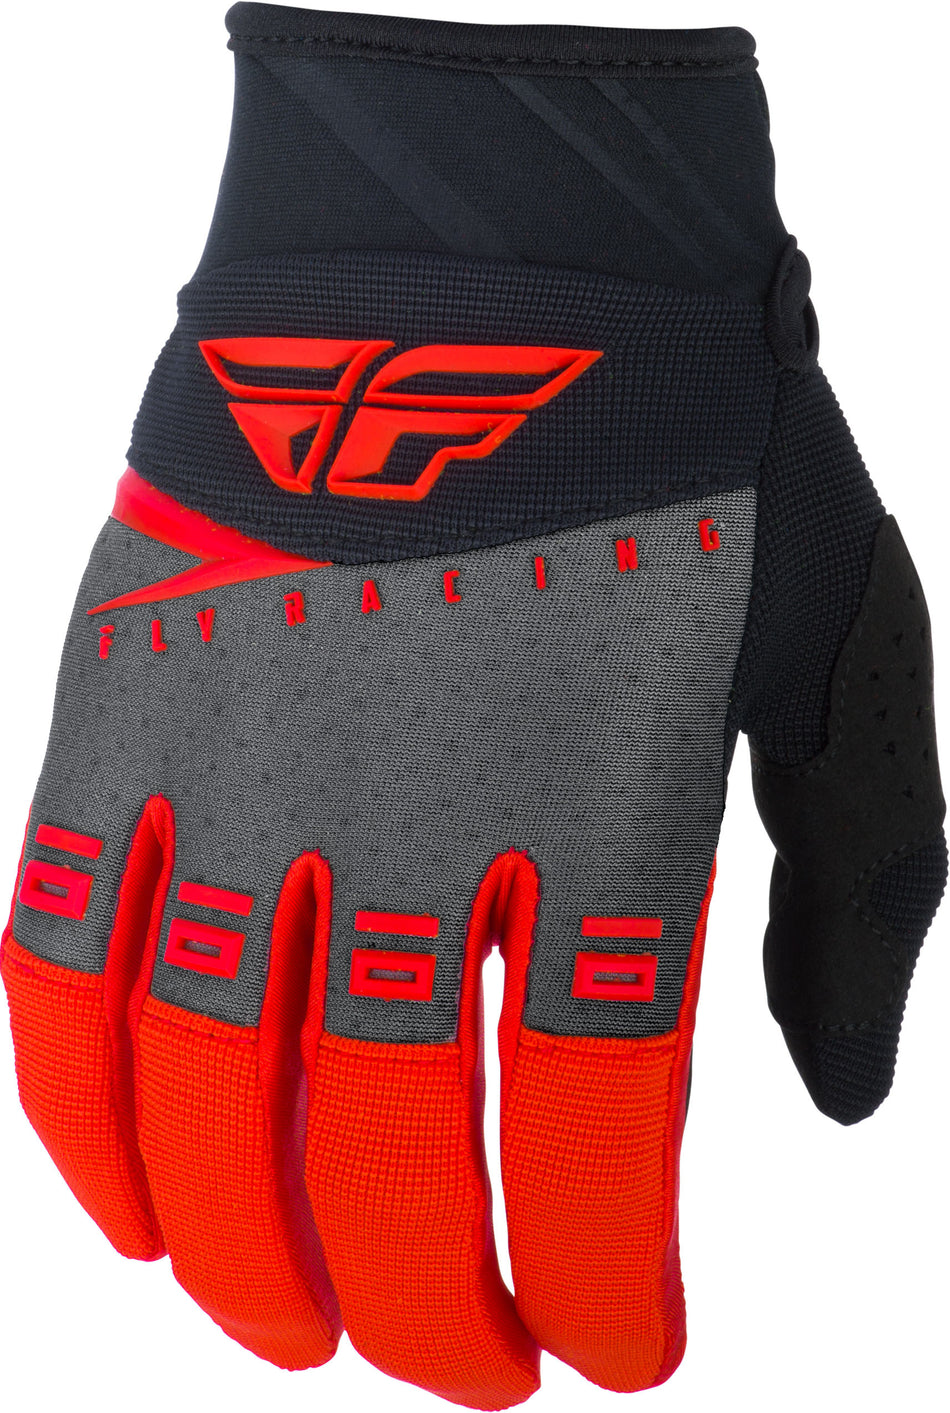 FLY RACING F-16 Gloves Red/Black Grey Sz 04 372-91204